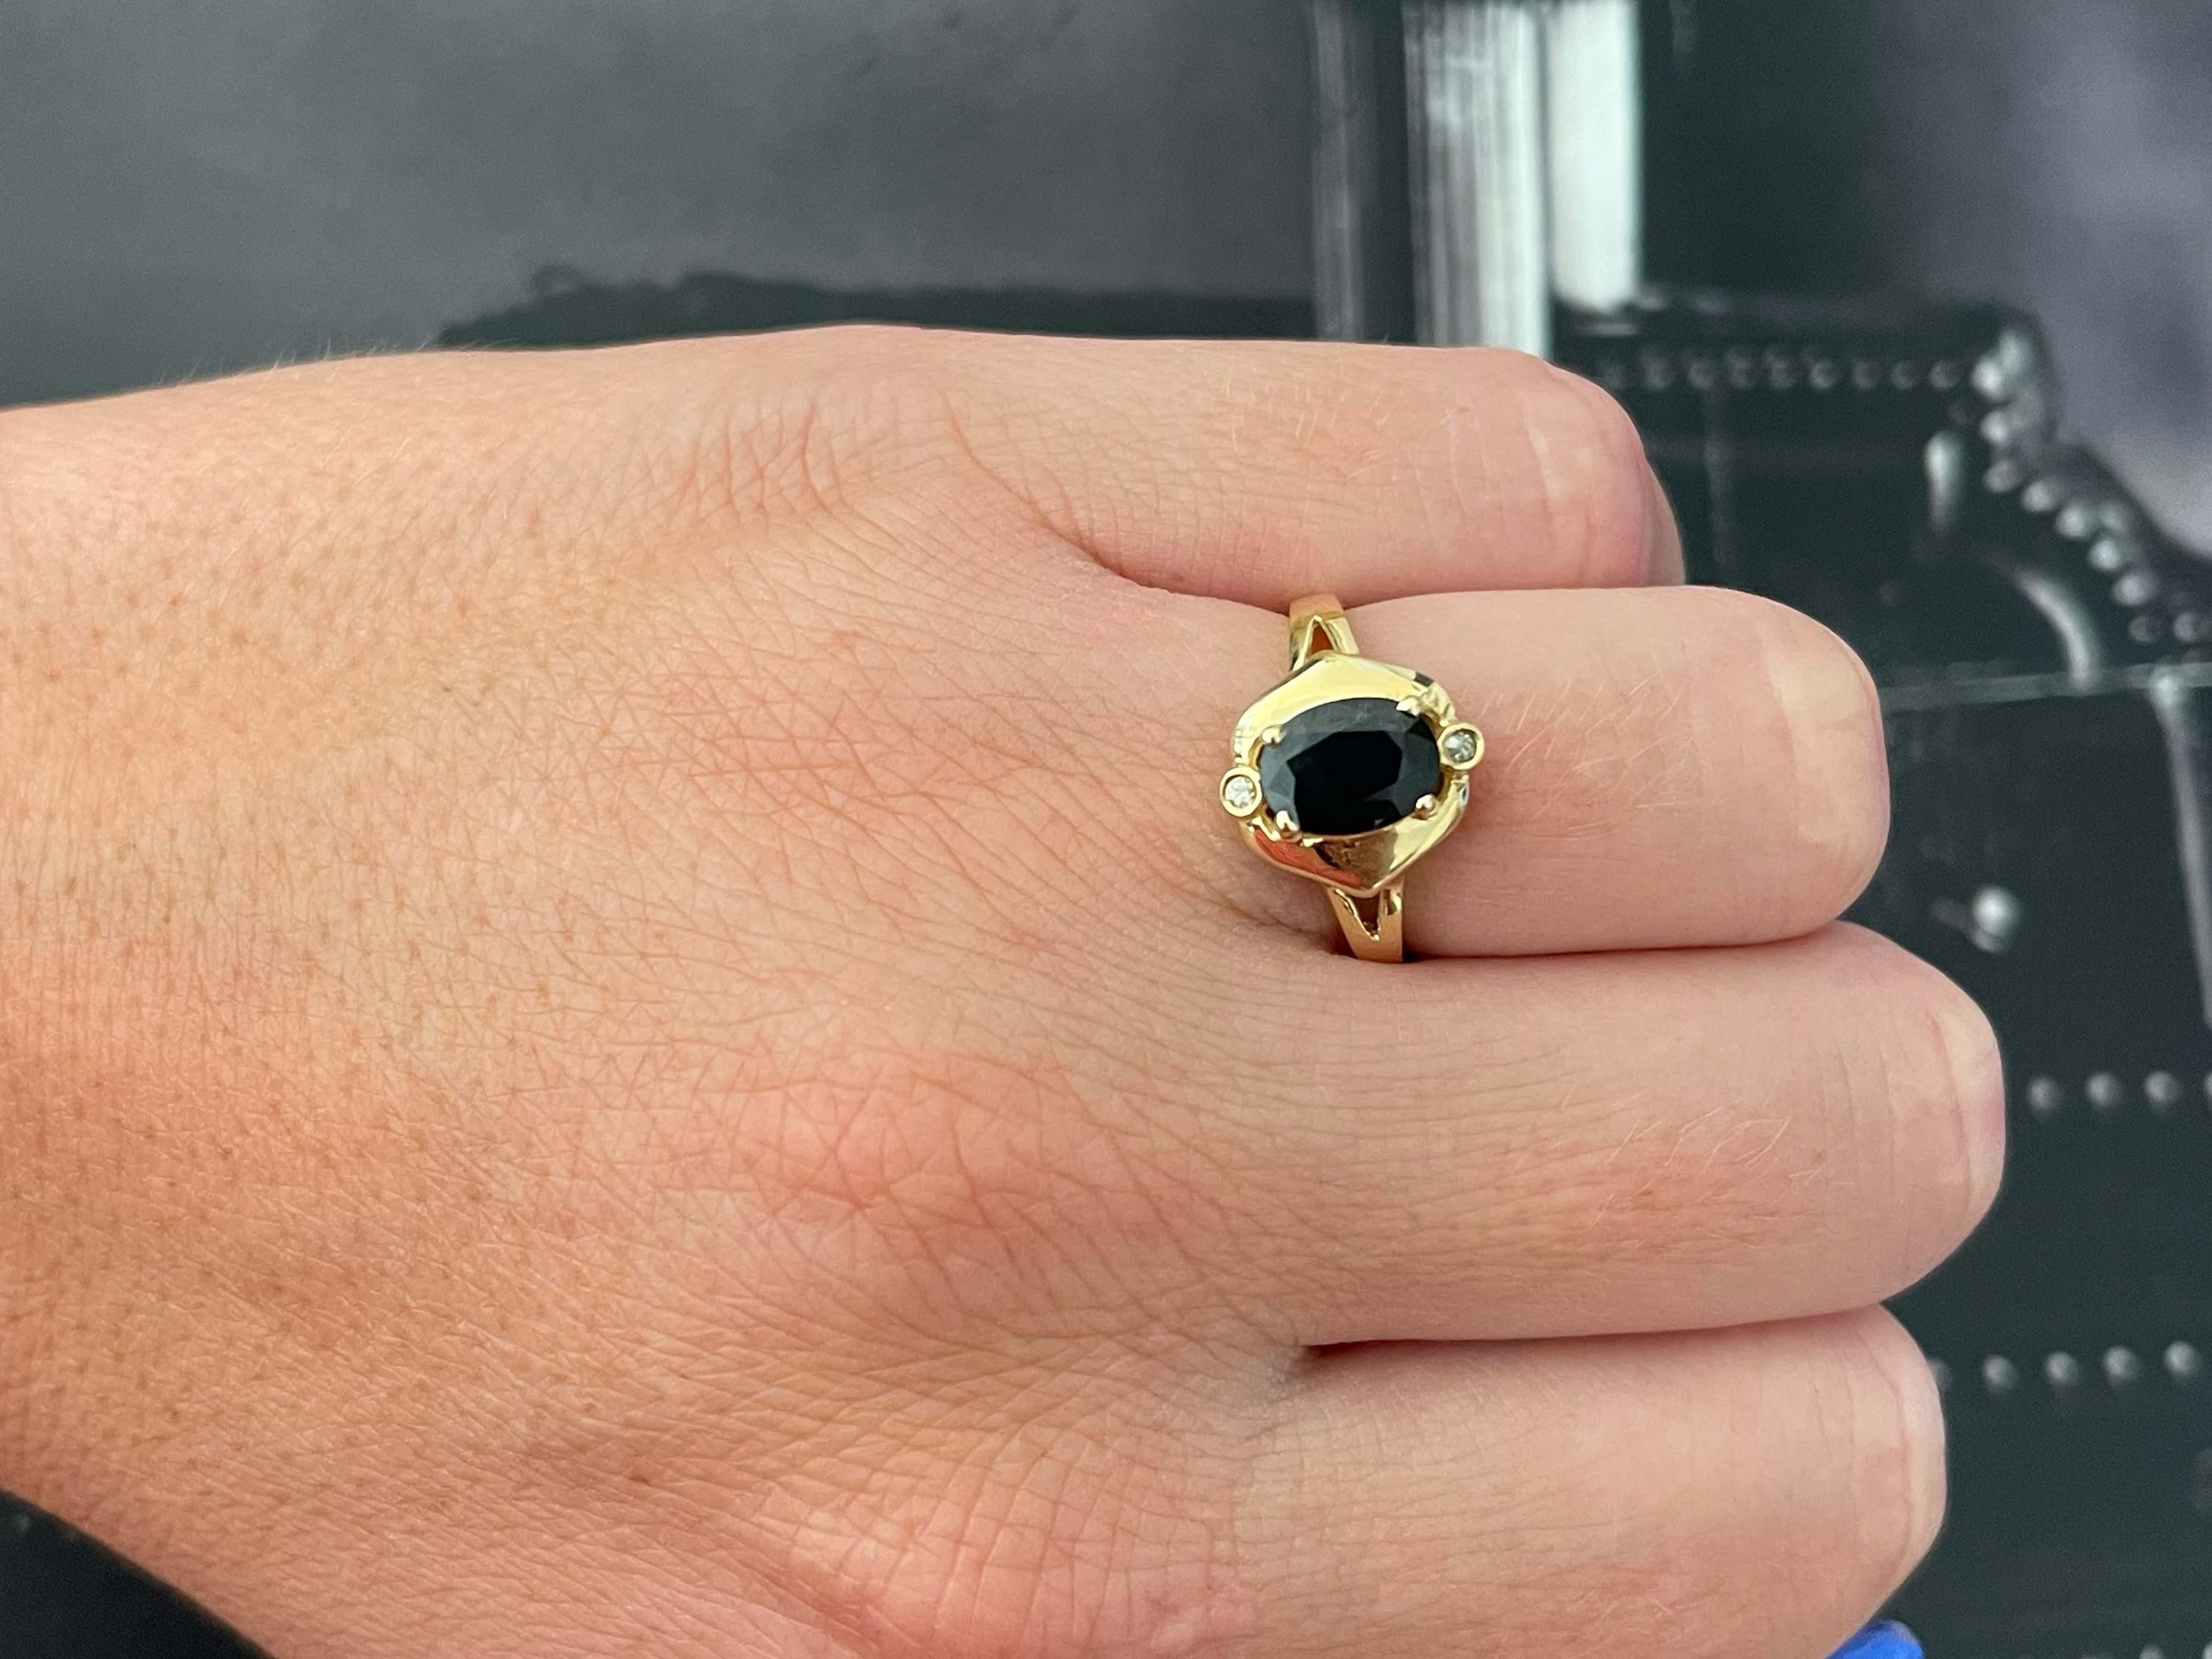 Item Specifications:

Metal: 14K Yellow Gold

Style: Statement Ring

Ring Size: 6 (resizing available for a fee)

Total Weight: 2.6 Grams

Ring Height: 12.22 mm

Gemstone Specifications:

Gemstone: 1 blue sapphire

Shape: oval

Sapphire